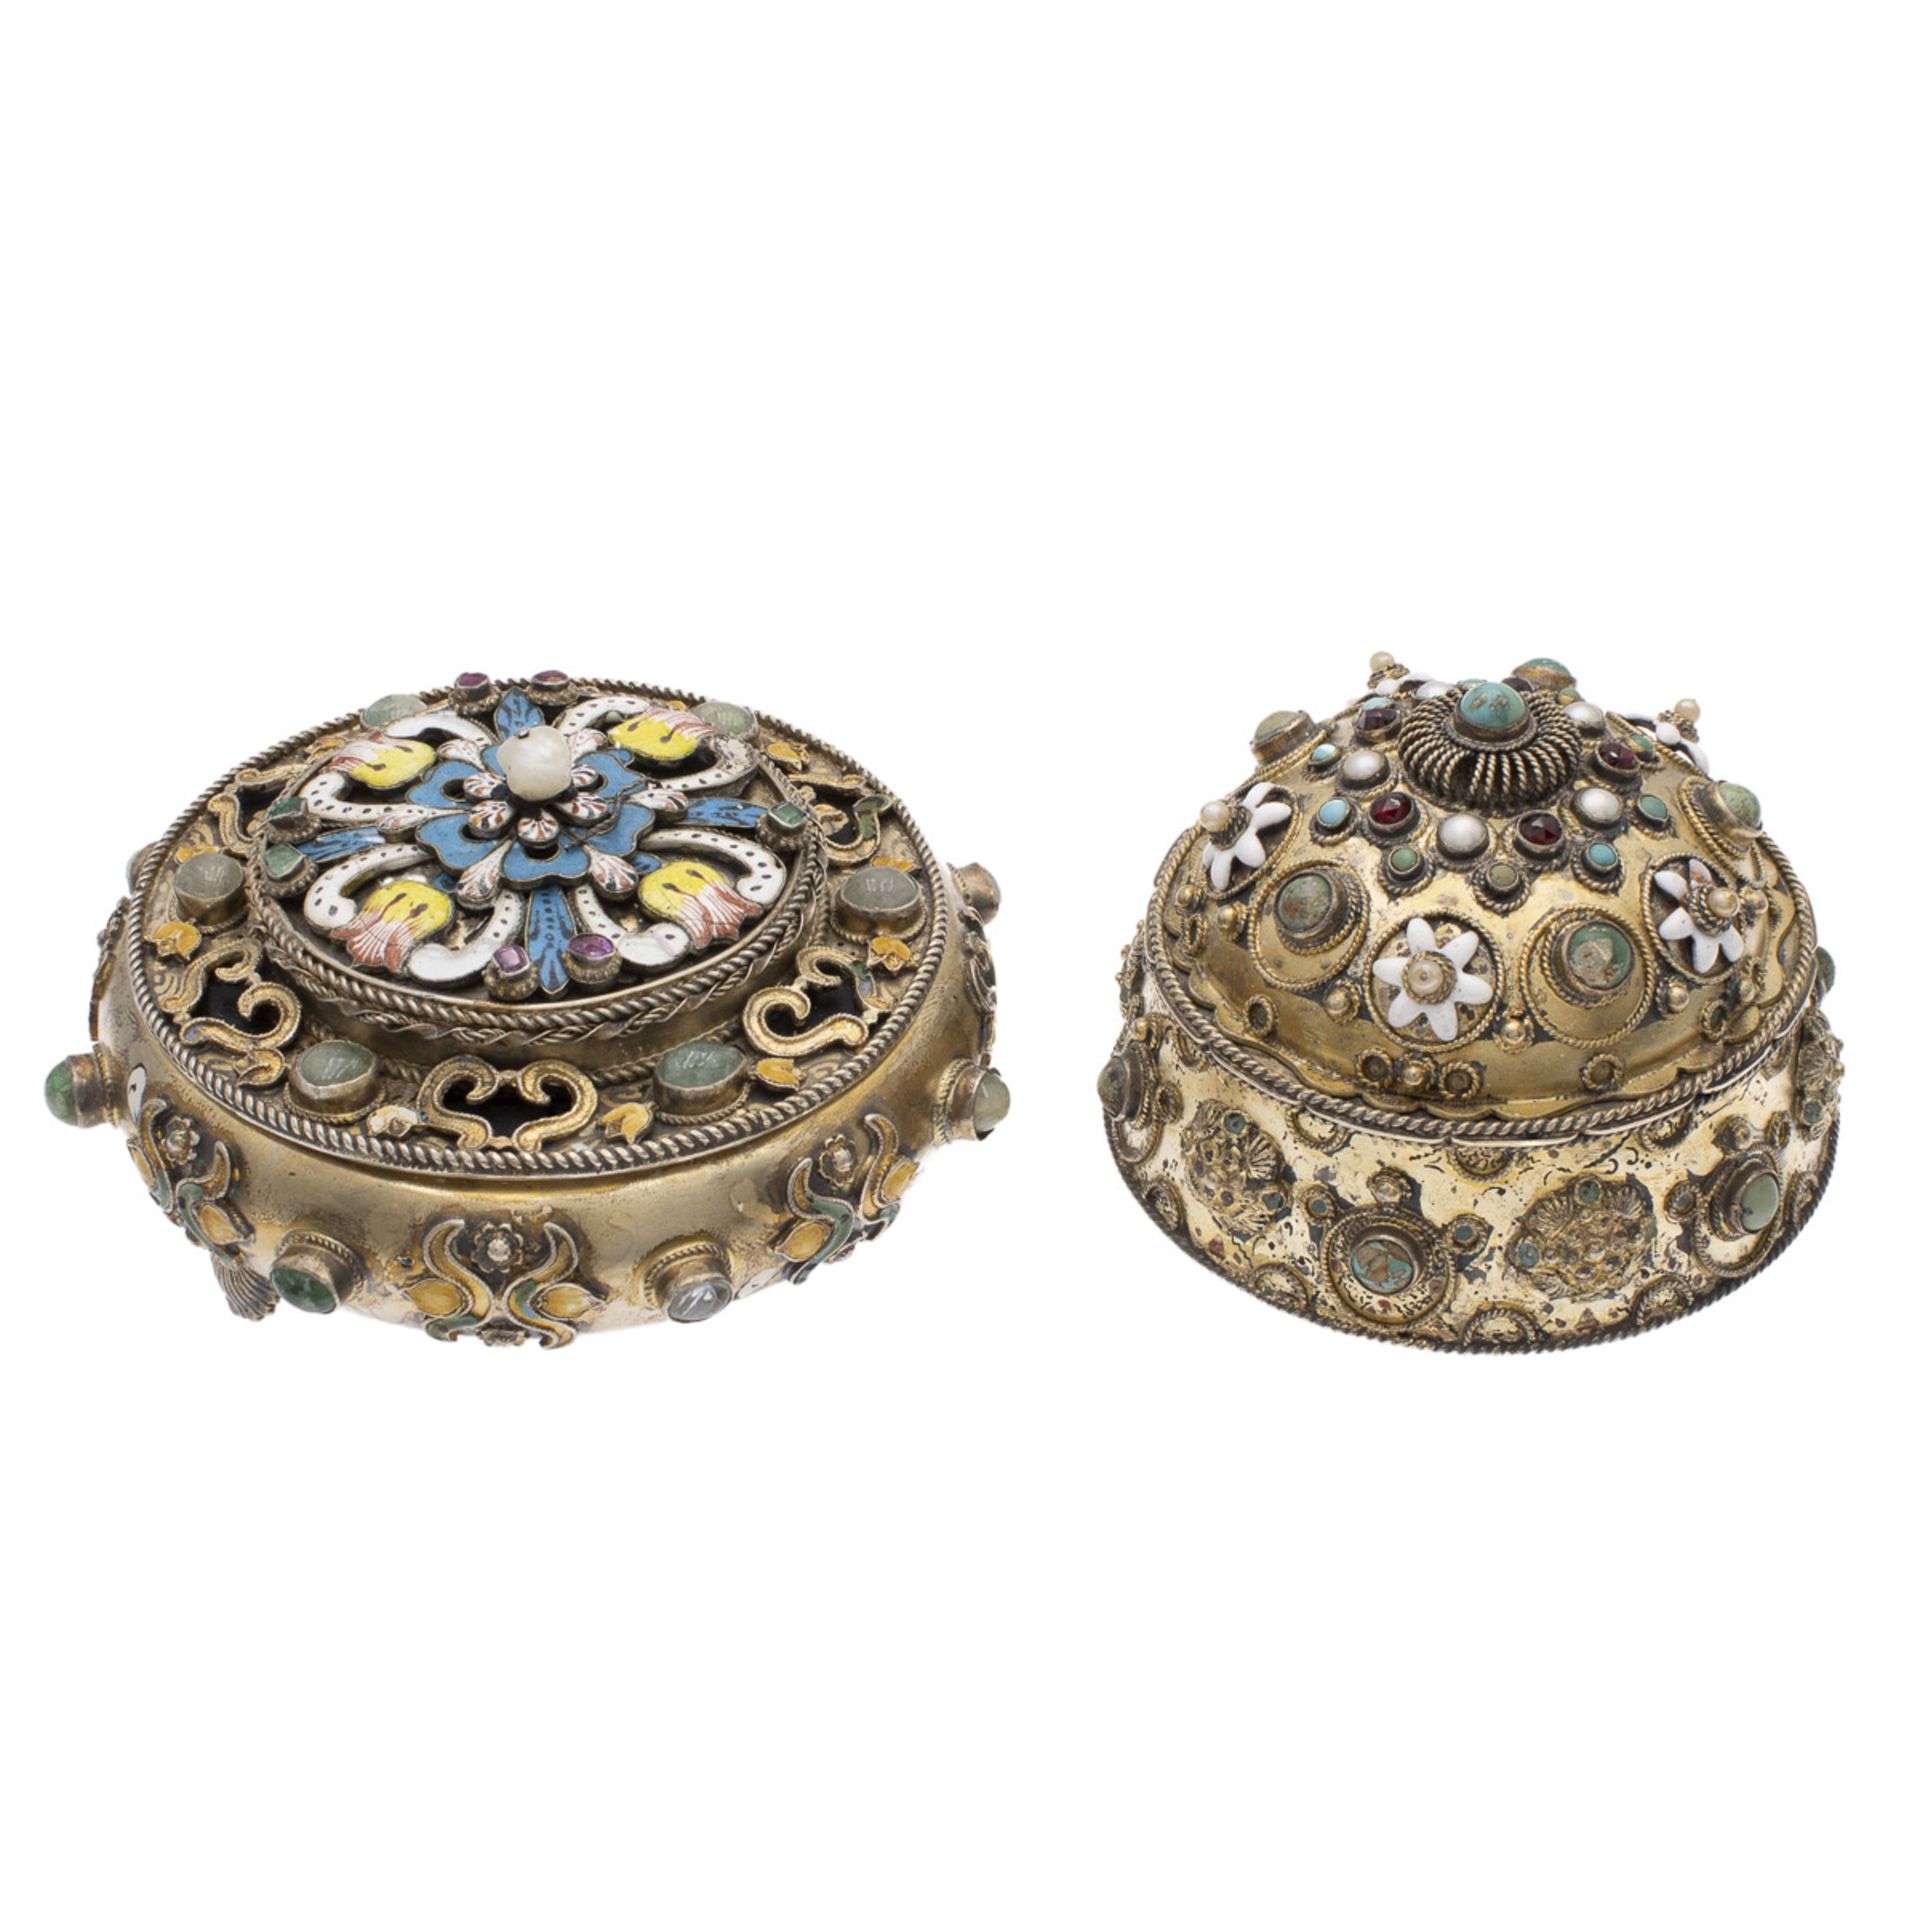 Group of two gilt silver jewelery boxes